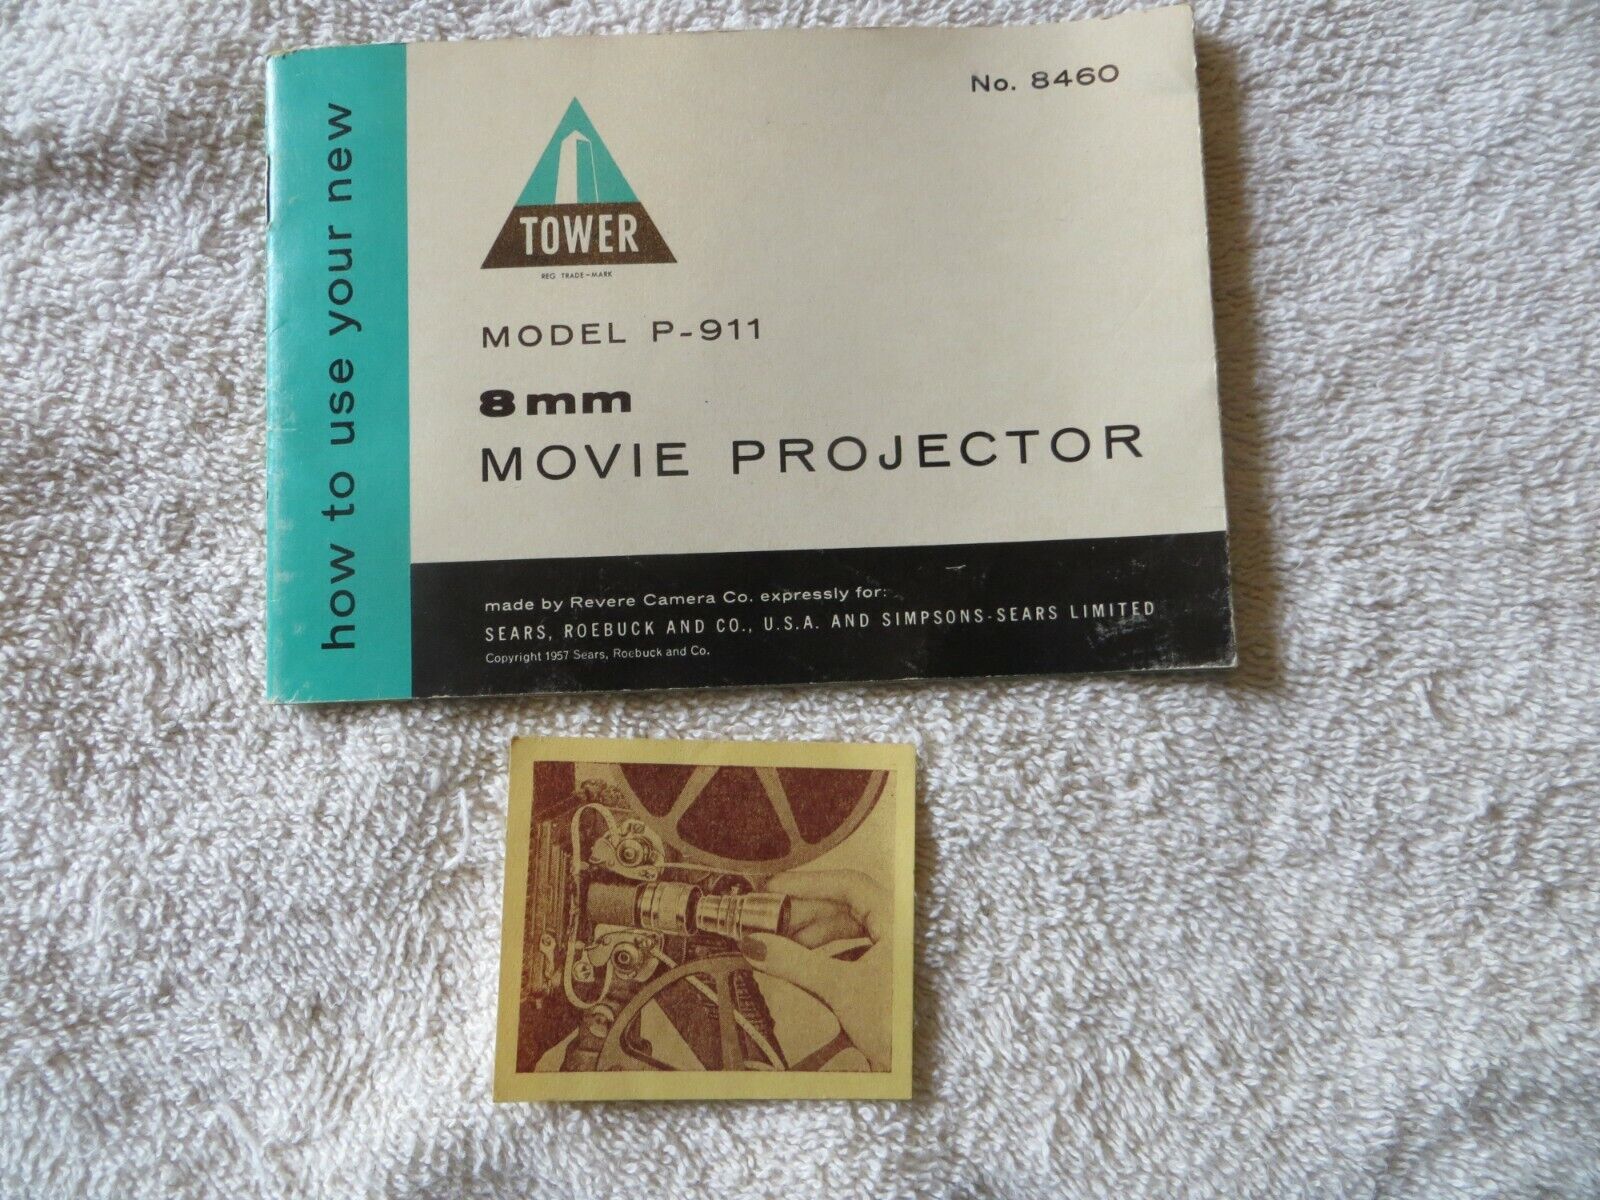 Vintage Tower Model P-911 8mm Movie Projector Manual/Revere Projection Lens